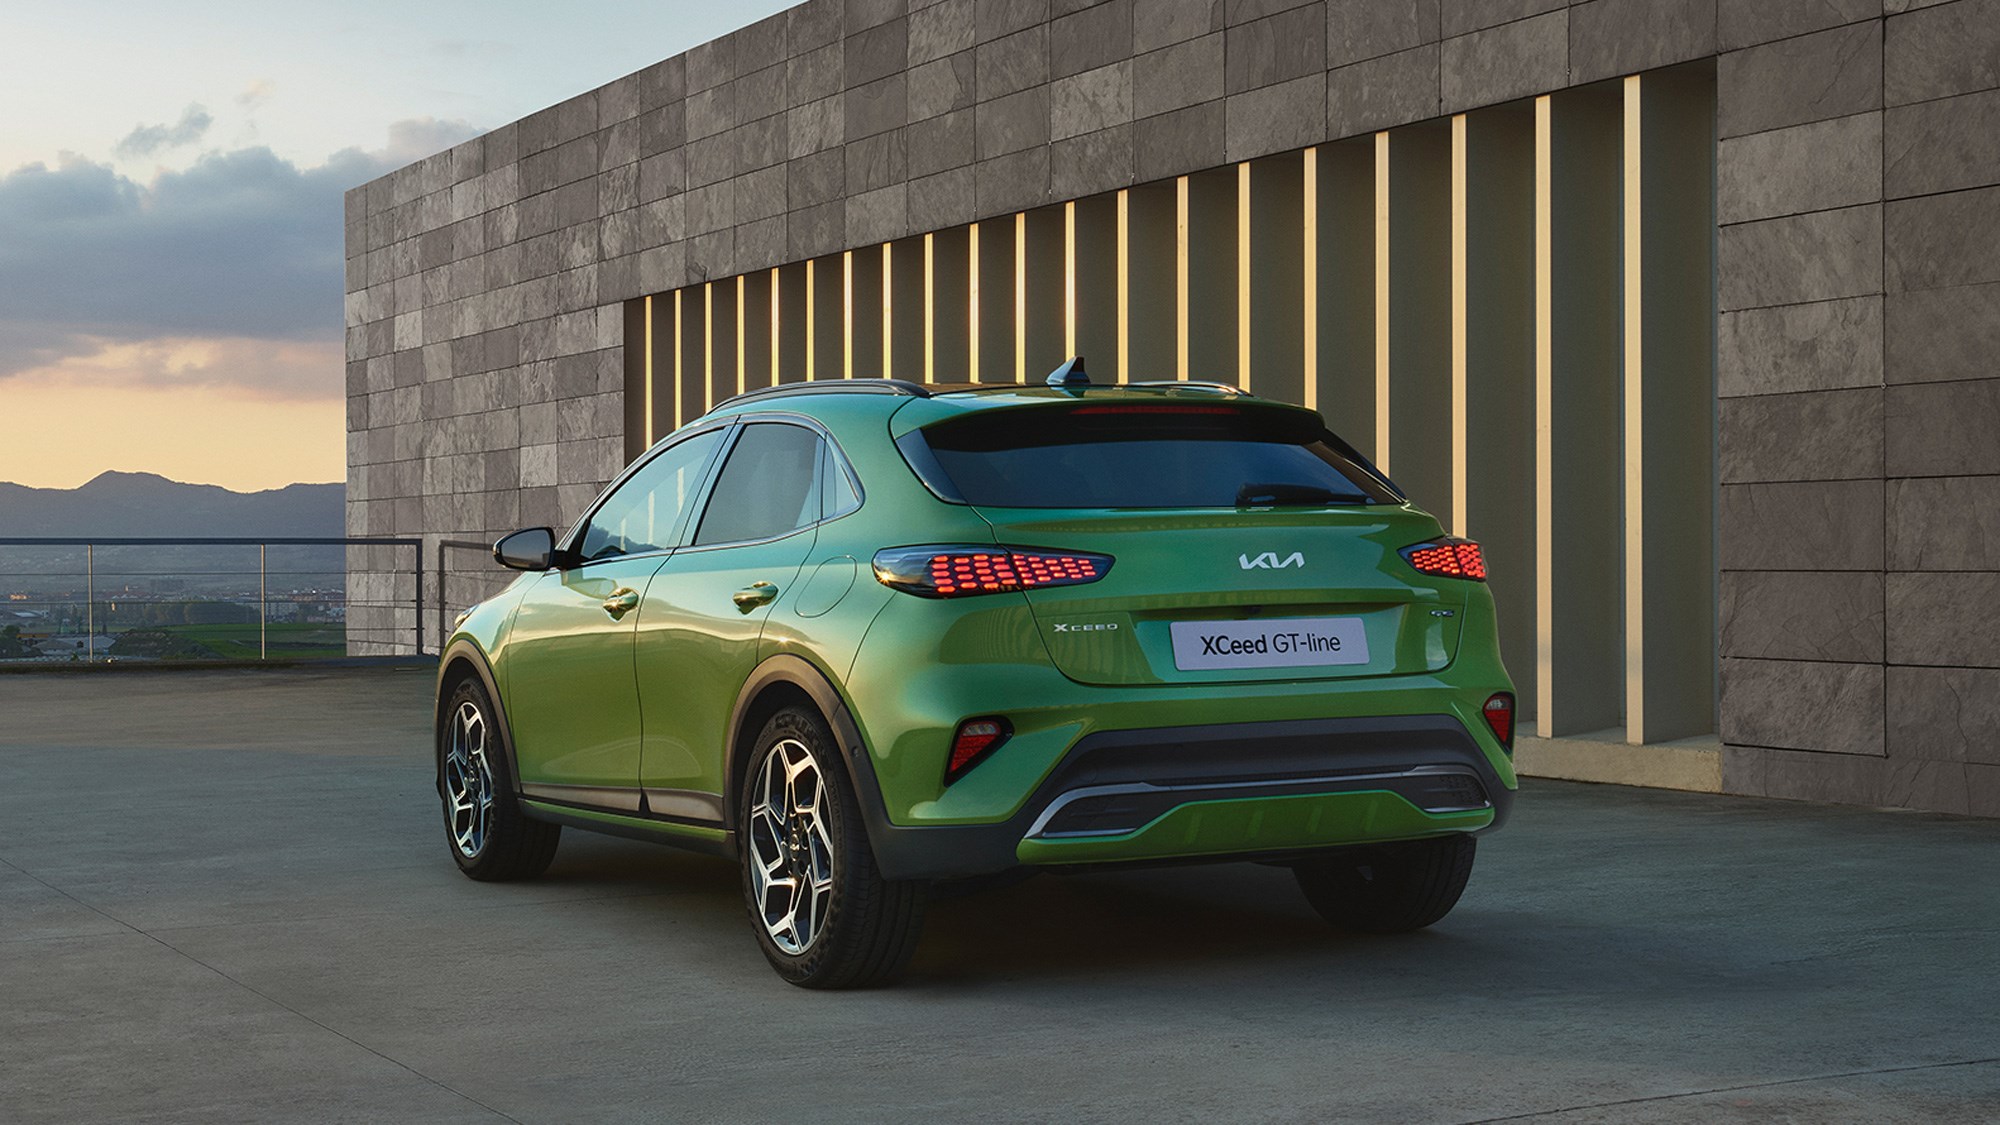 Kia Reveals New Plug-In Hybrid Versions Of XCeed and Ceed Sportswagon